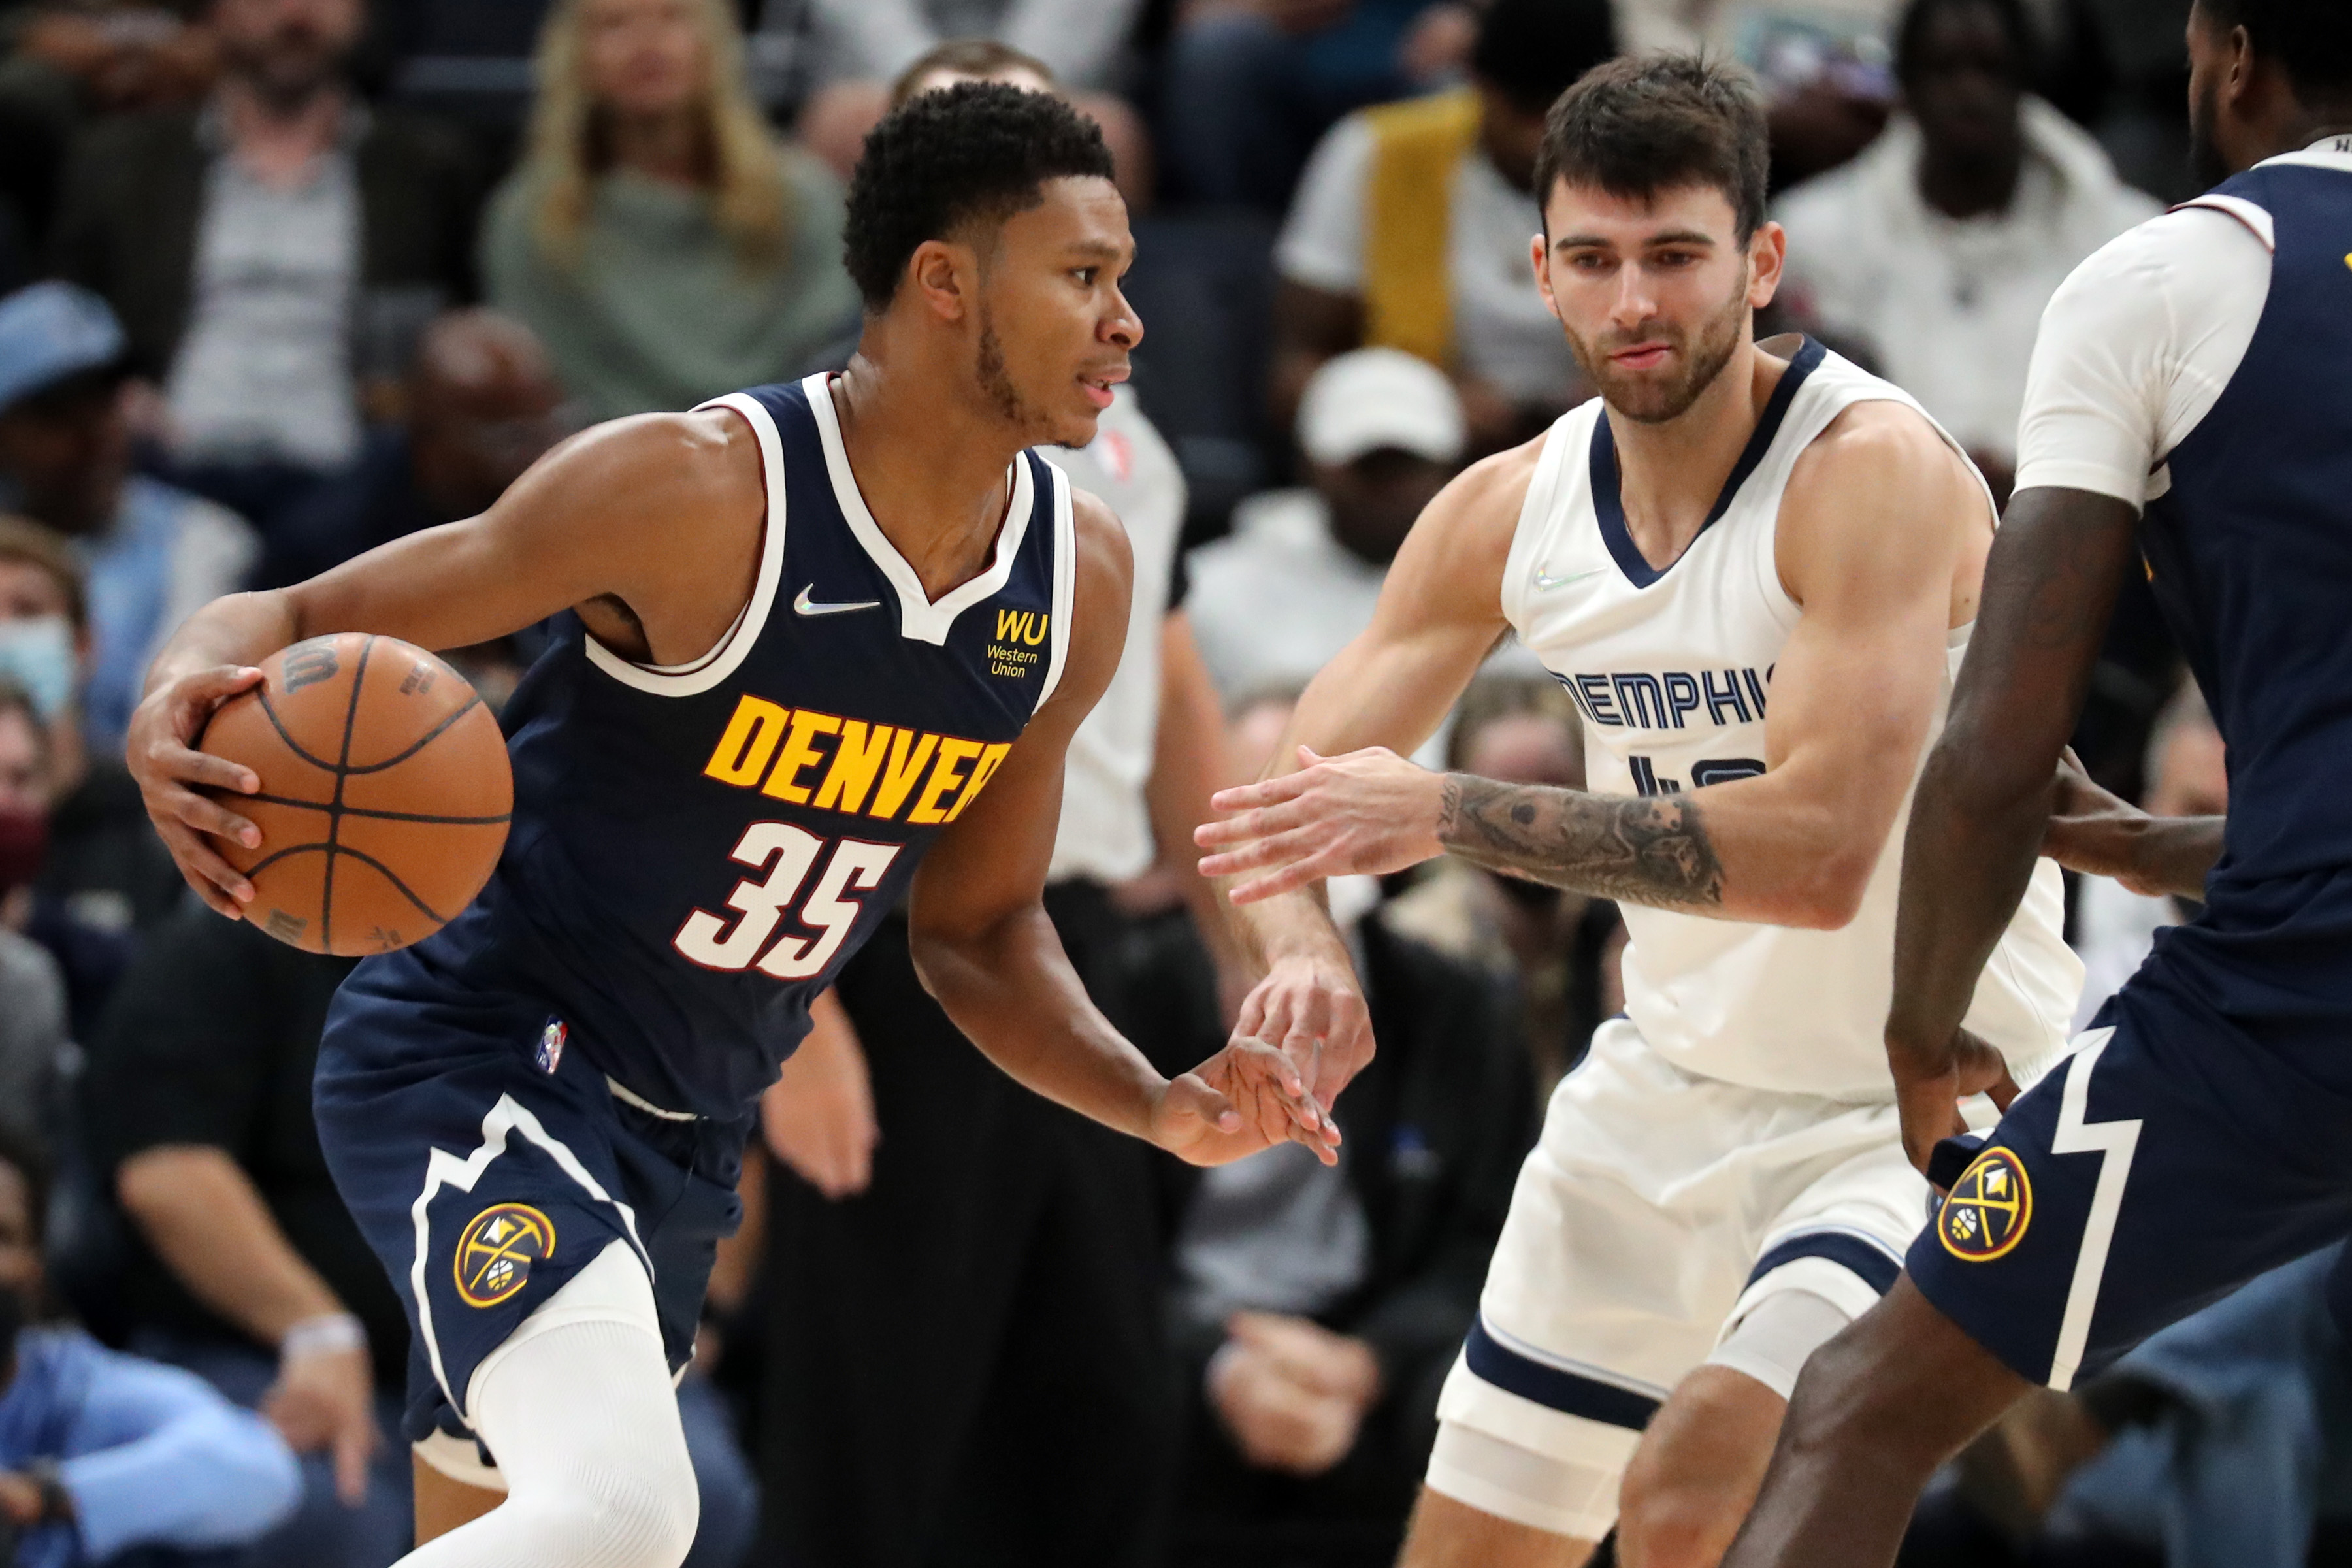 Nov 1, 2021; Memphis, Tennessee, USA; Denver Nuggets guard-forward P.J. Dozier (35) moves to the basket as Memphis Grizzles guard John Konchar (46) defends during the second half at FedExForum. Mandatory Credit: Petre Thomas-USA TODAY Sports